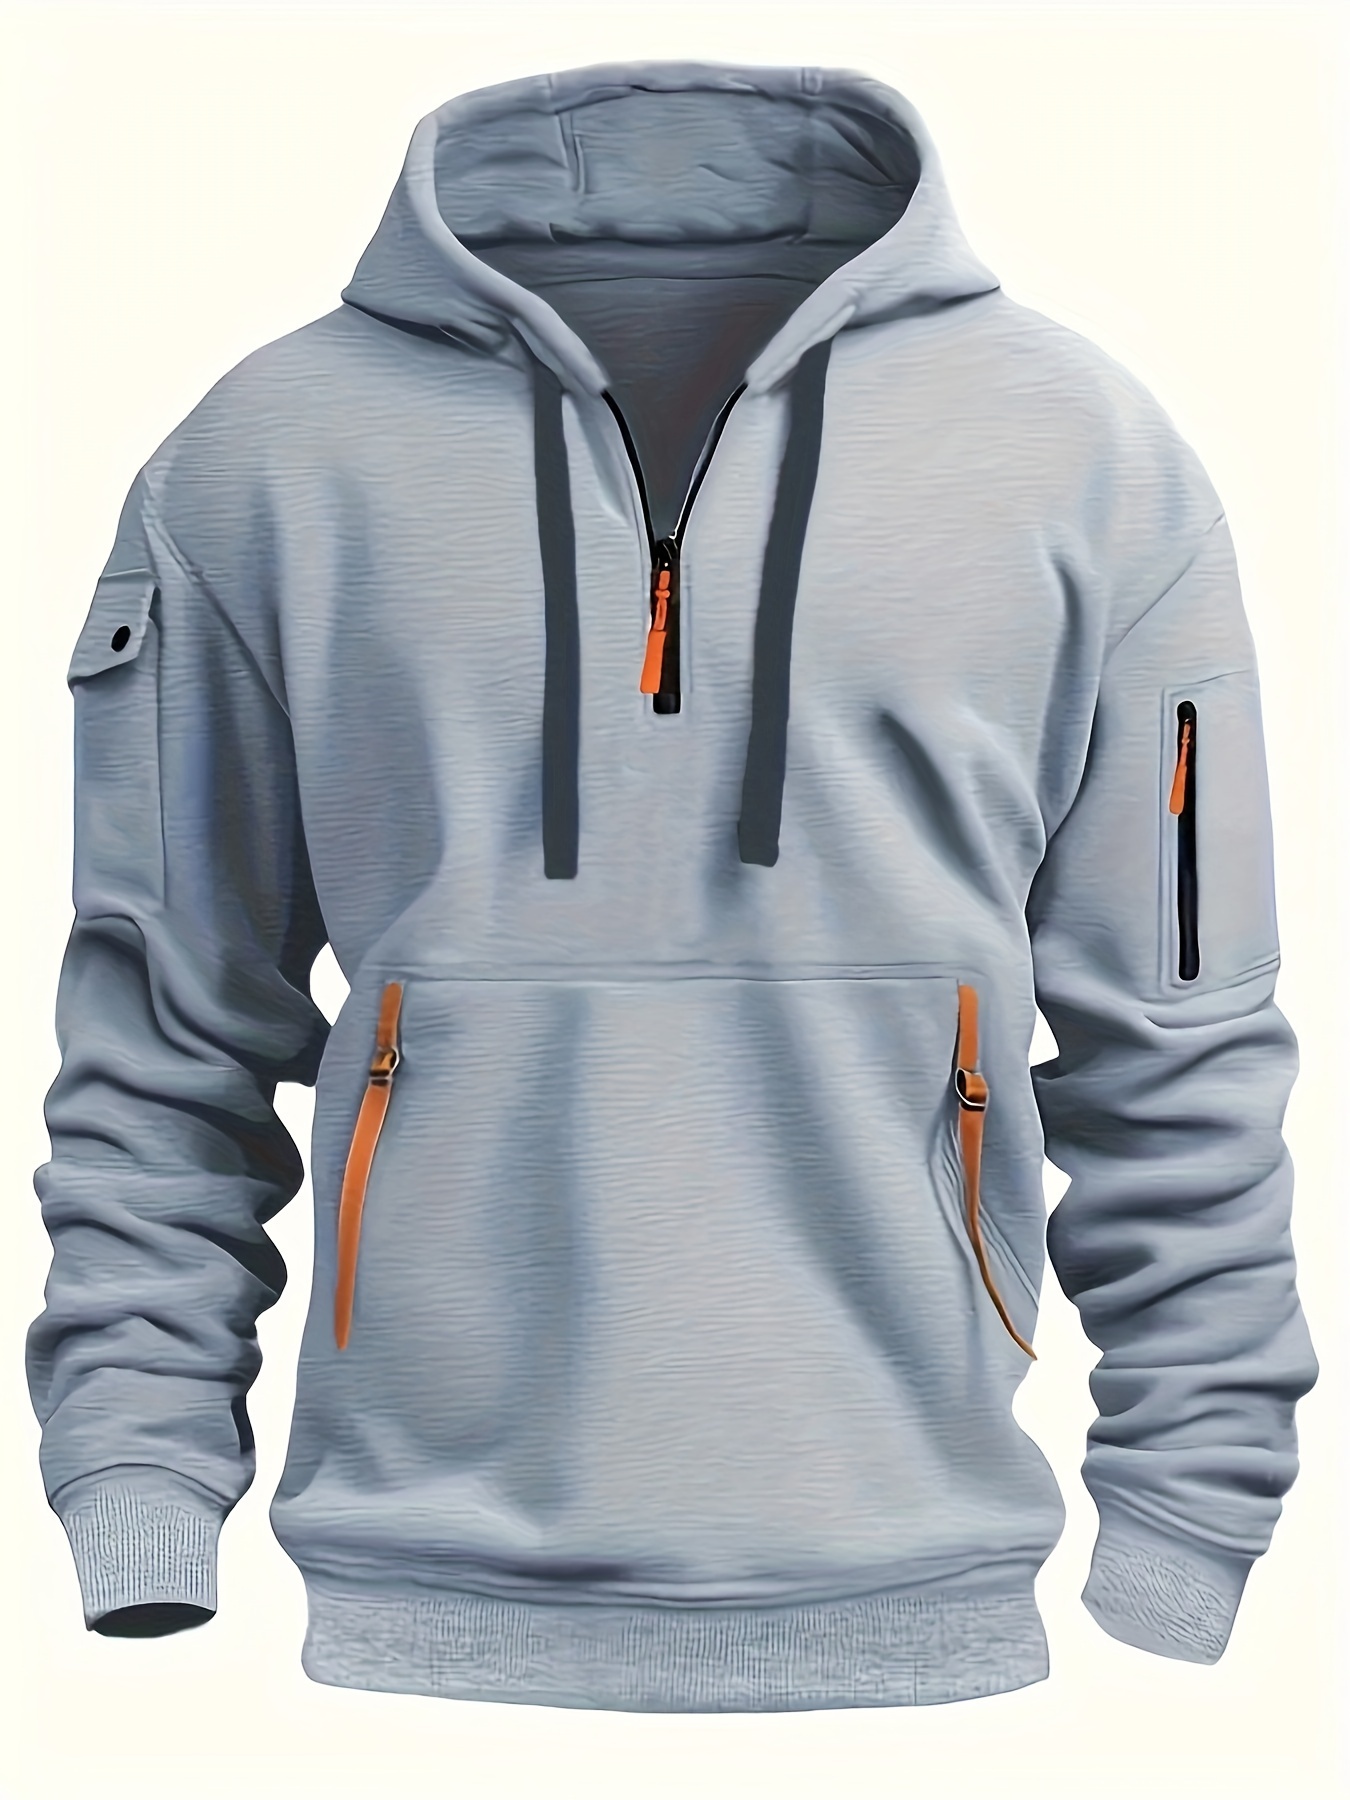 mens fashion half zipped sports hoodie with pockets casual athletic pullover comfortable fit sweatshirt with hood details 0